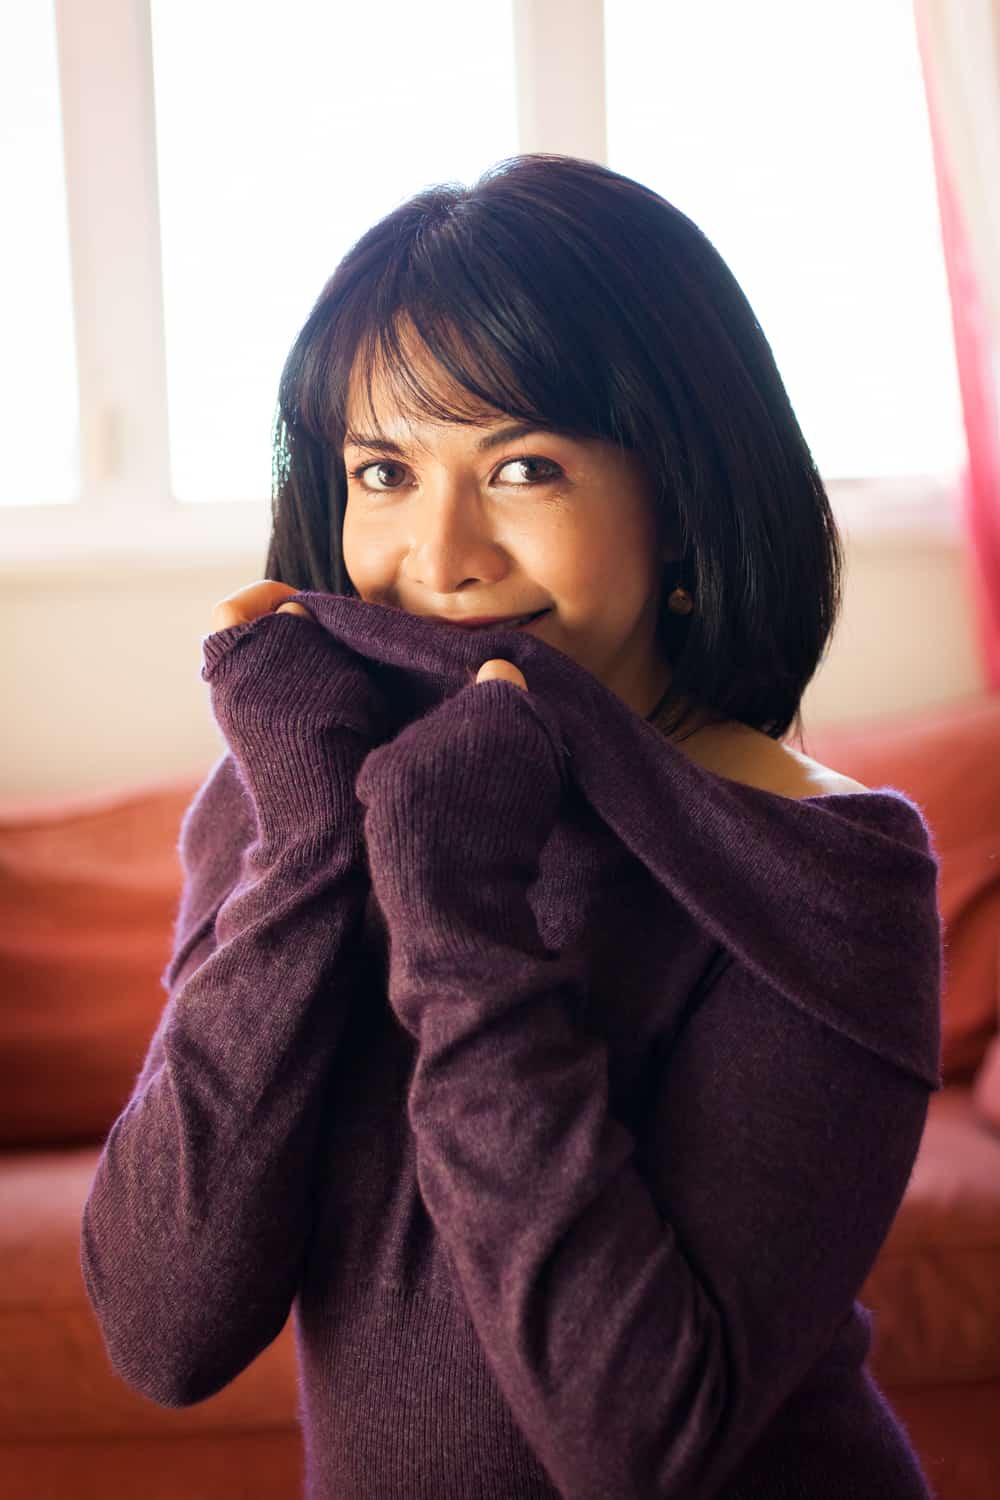 Woman with short black hair wearing purple off-shoulder sweater